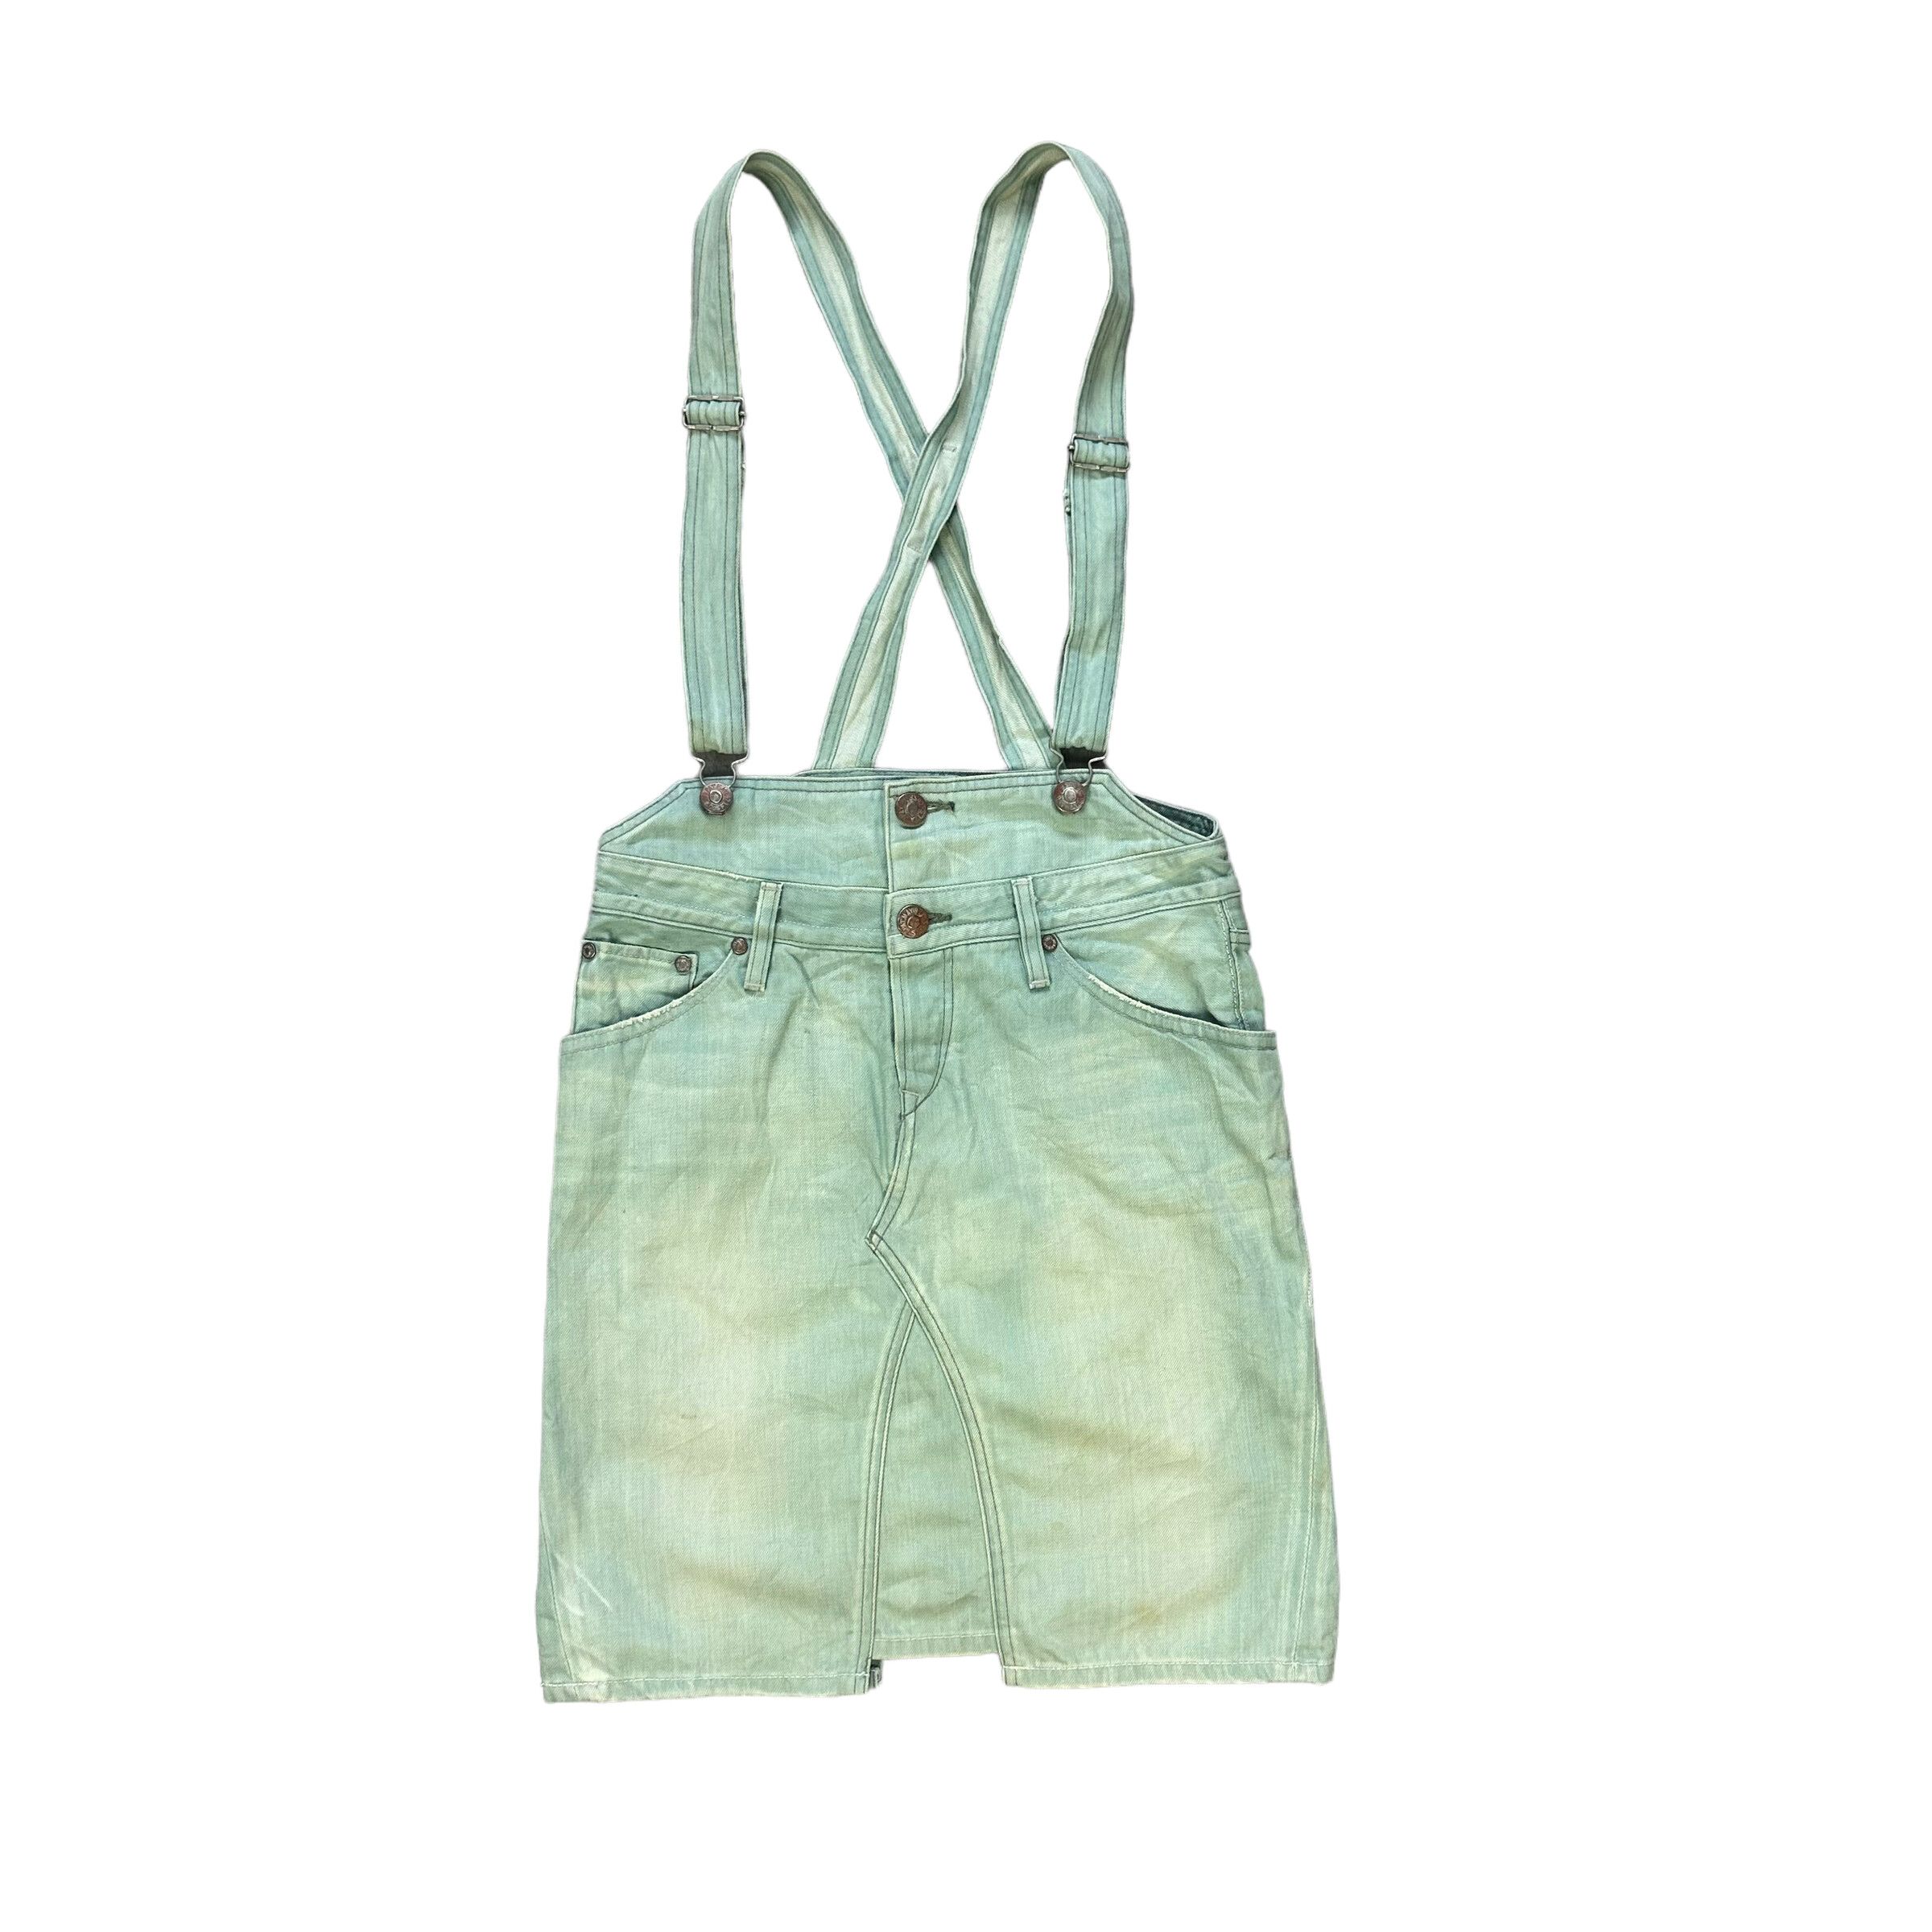 LEVIS LADY STYLE OVERALL MINI SKIRT IN GREEN DENIM #8659-019 - 1